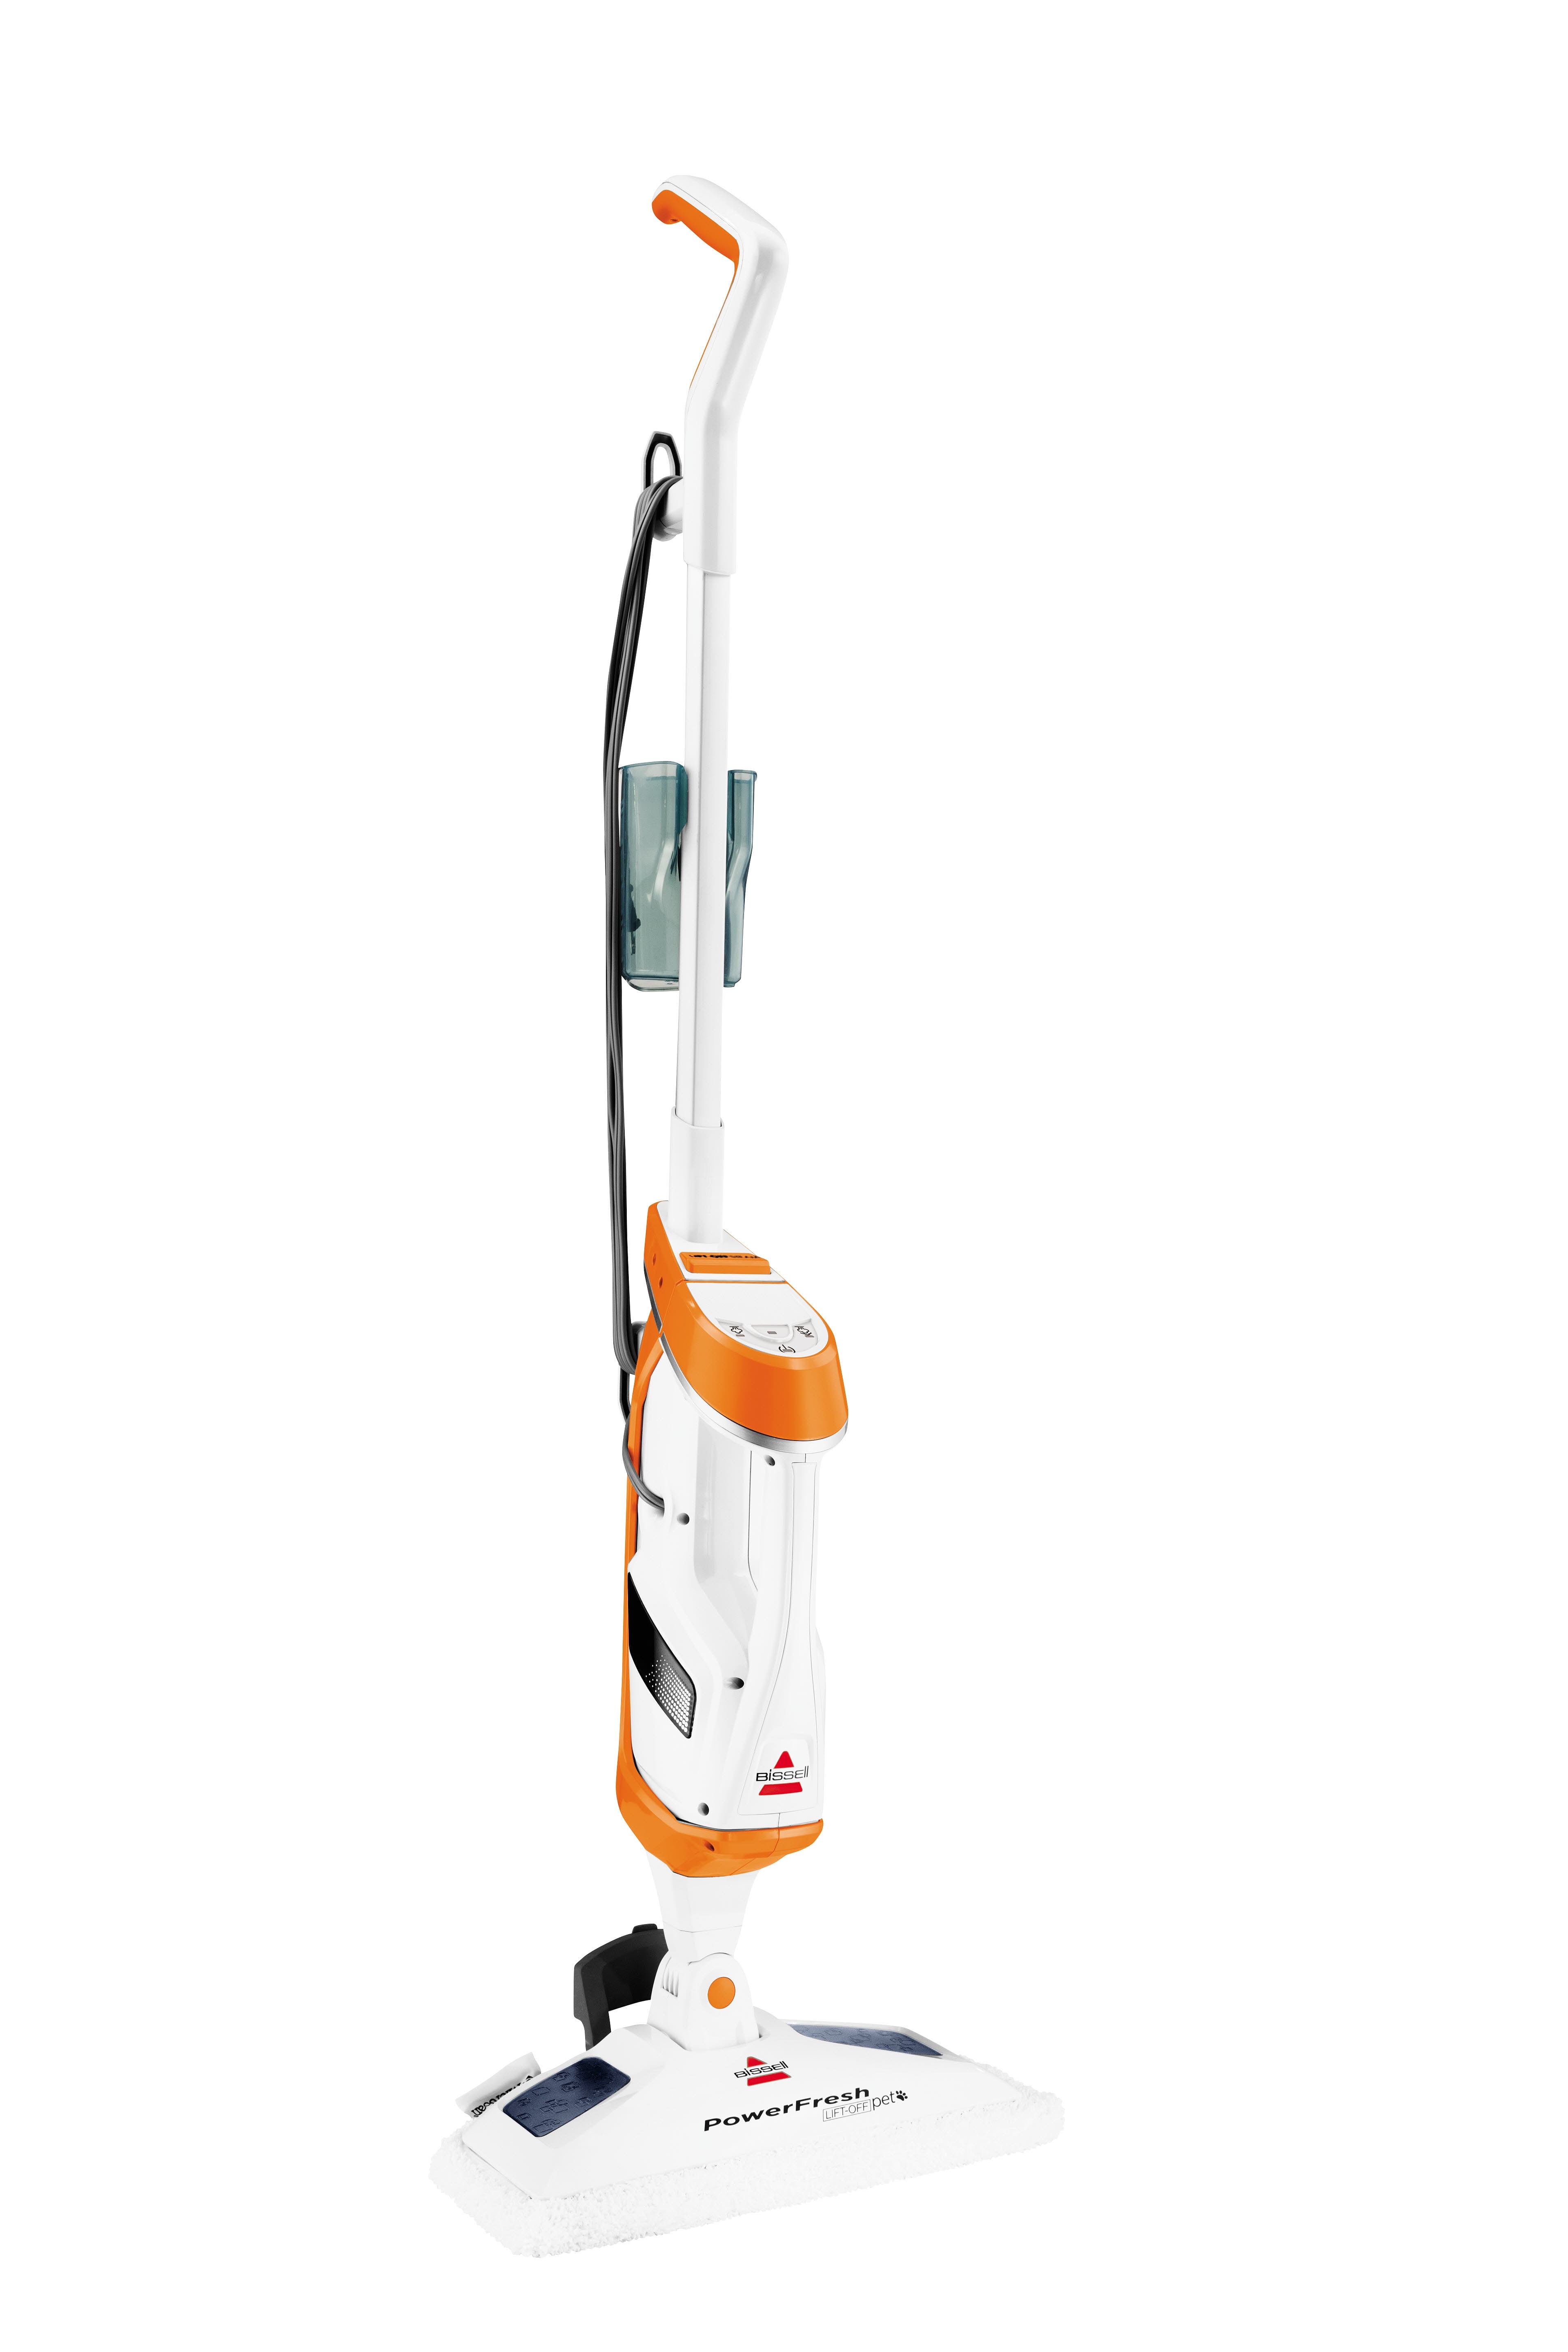 The $87 Bissell PowerFresh Pet Steam Mop Is a 'Godsend